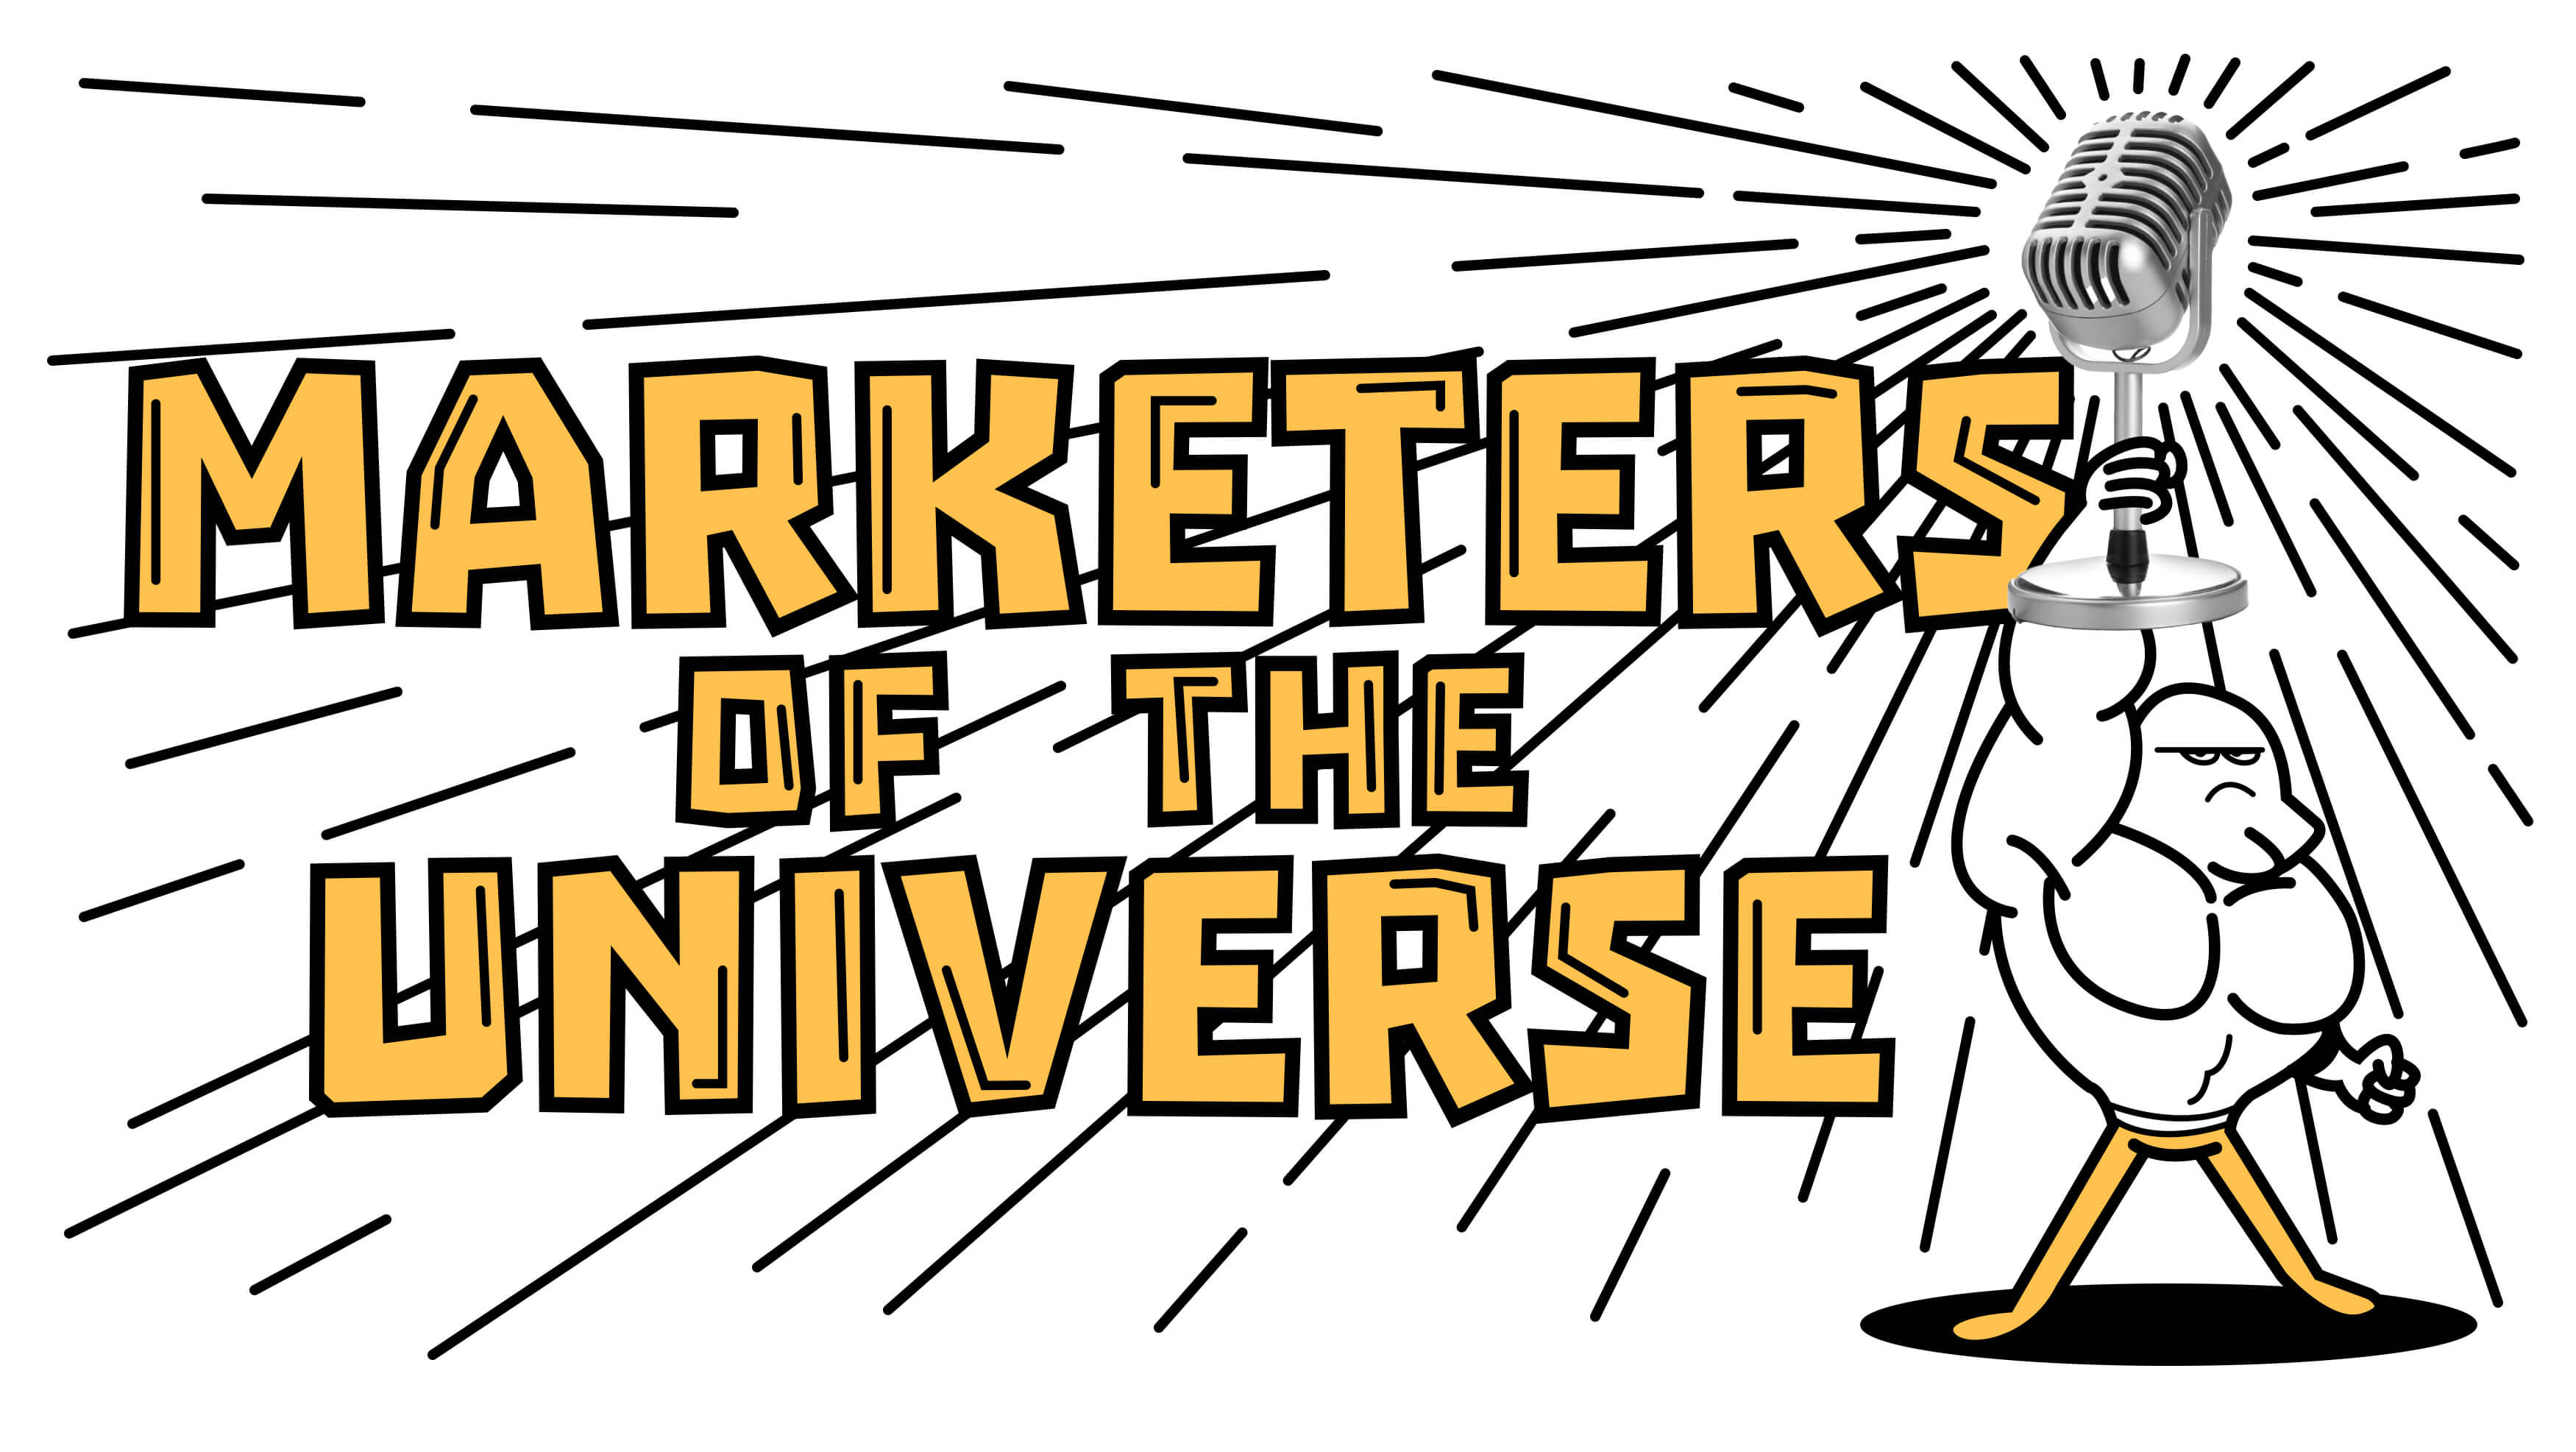 Illustration of a man holding a microphone standing next to the marketers of the universe text